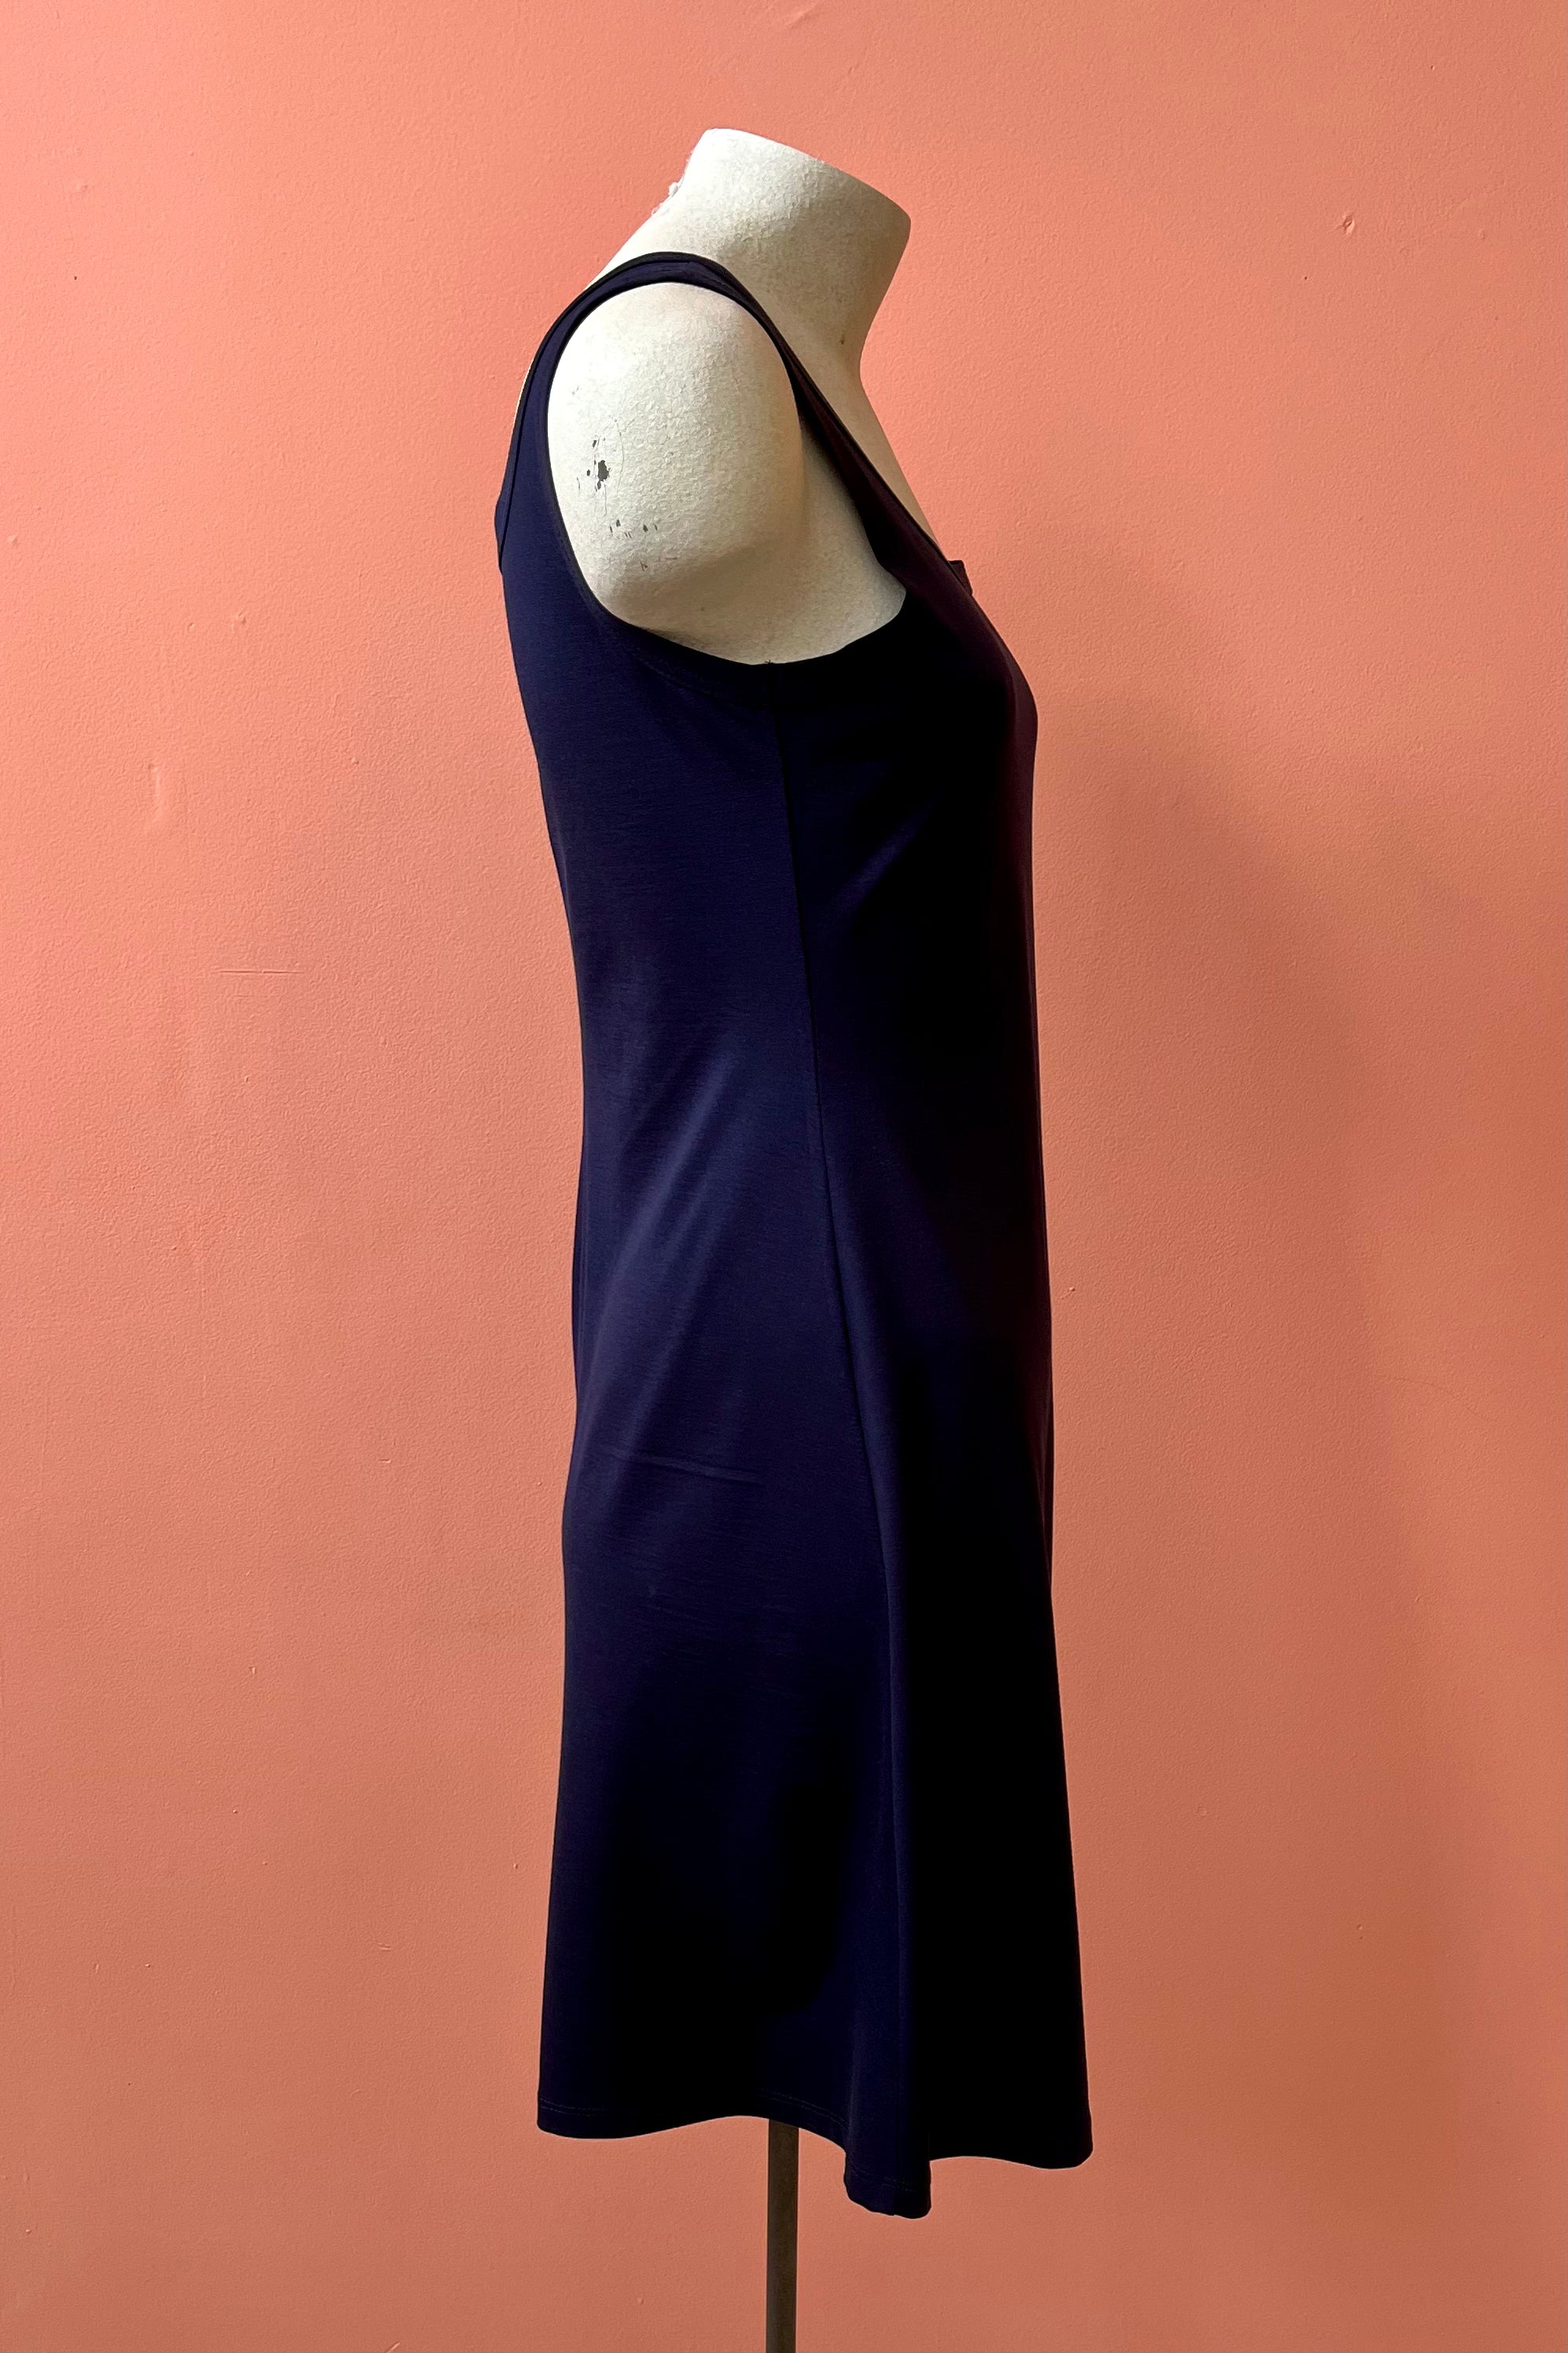 B-Dress by Yul Voy, Navy, side view, tank dress, wide straps, scoop neck front and back, A-line shape, above the knee, sizes XS to XXL, made in Montreal